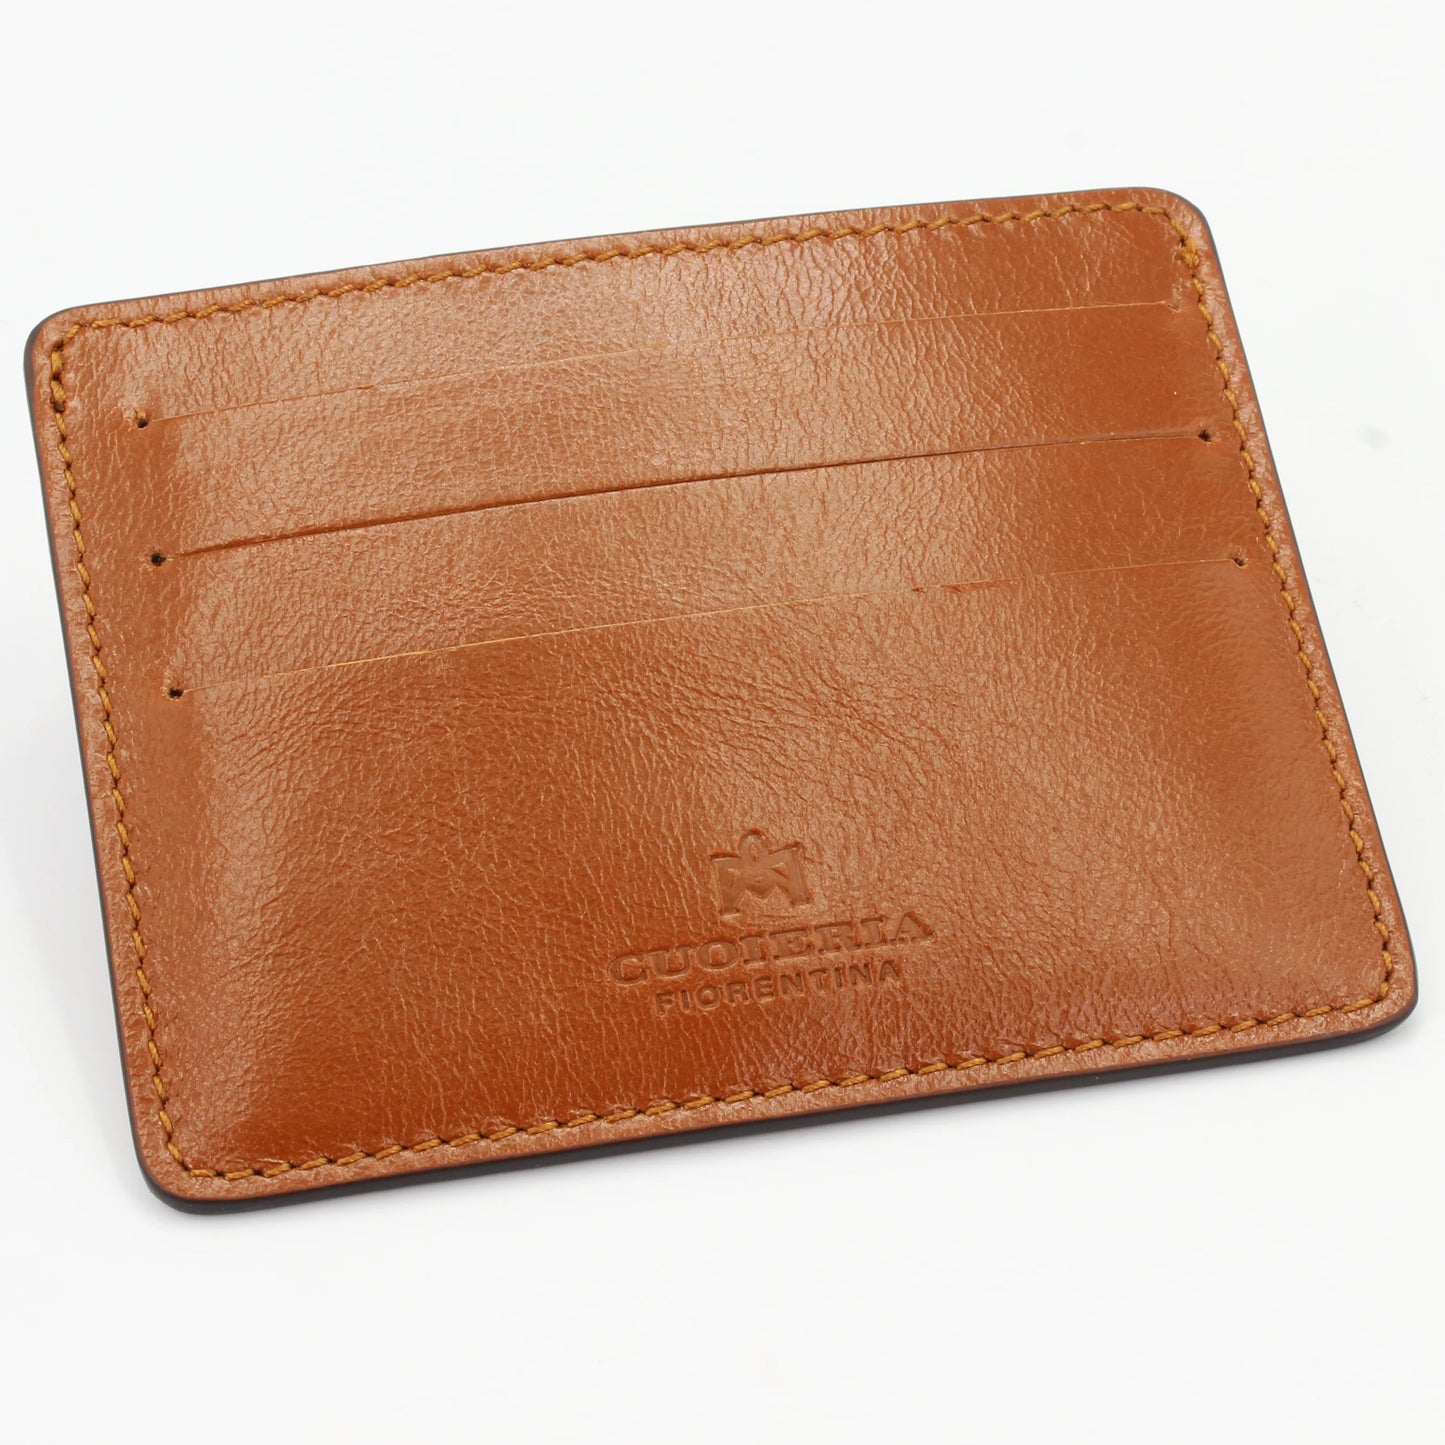 Shop our Italian-made Cuoieria Fiorentina Italian leather card holder in caramel (P000000012735) or browse our range of Italian wallets and purses for men & women in-store at Aliverti Cape Town, or shop online.   We deliver in South Africa & offer multiple payment plans as well as accept multiple safe & secure payment methods.